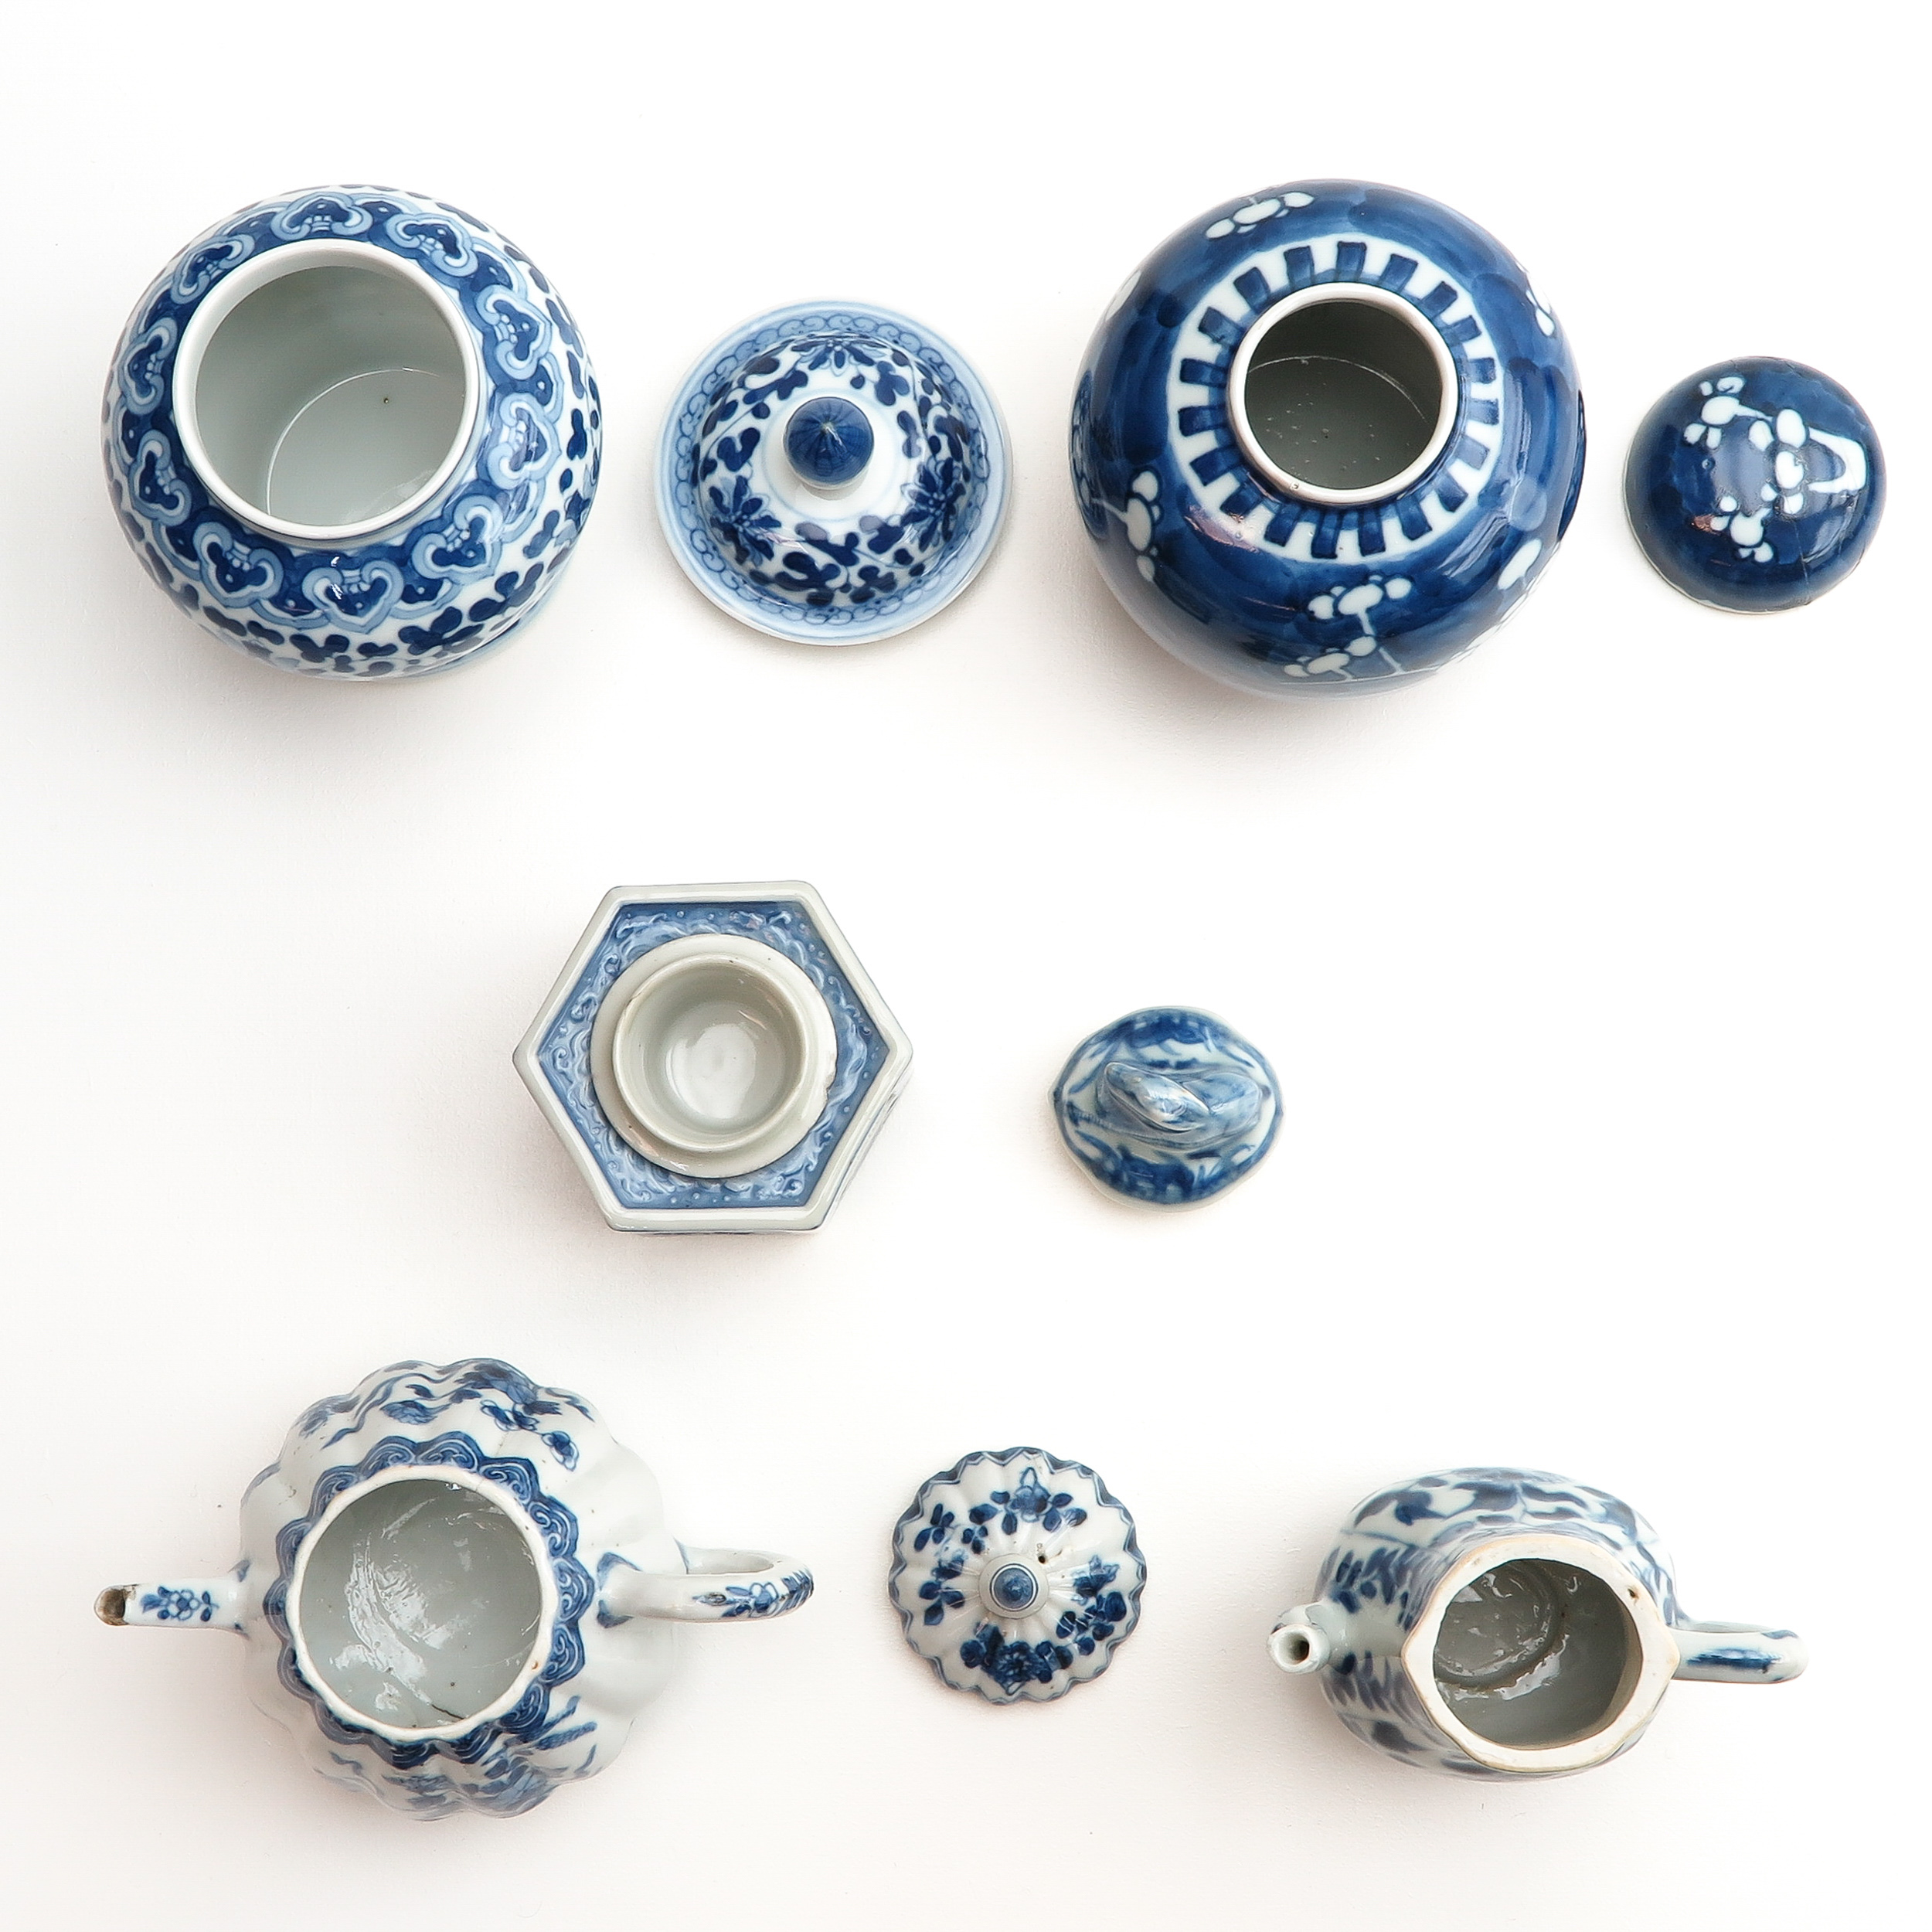 A Diverse Collection of Porcelain - Image 5 of 10